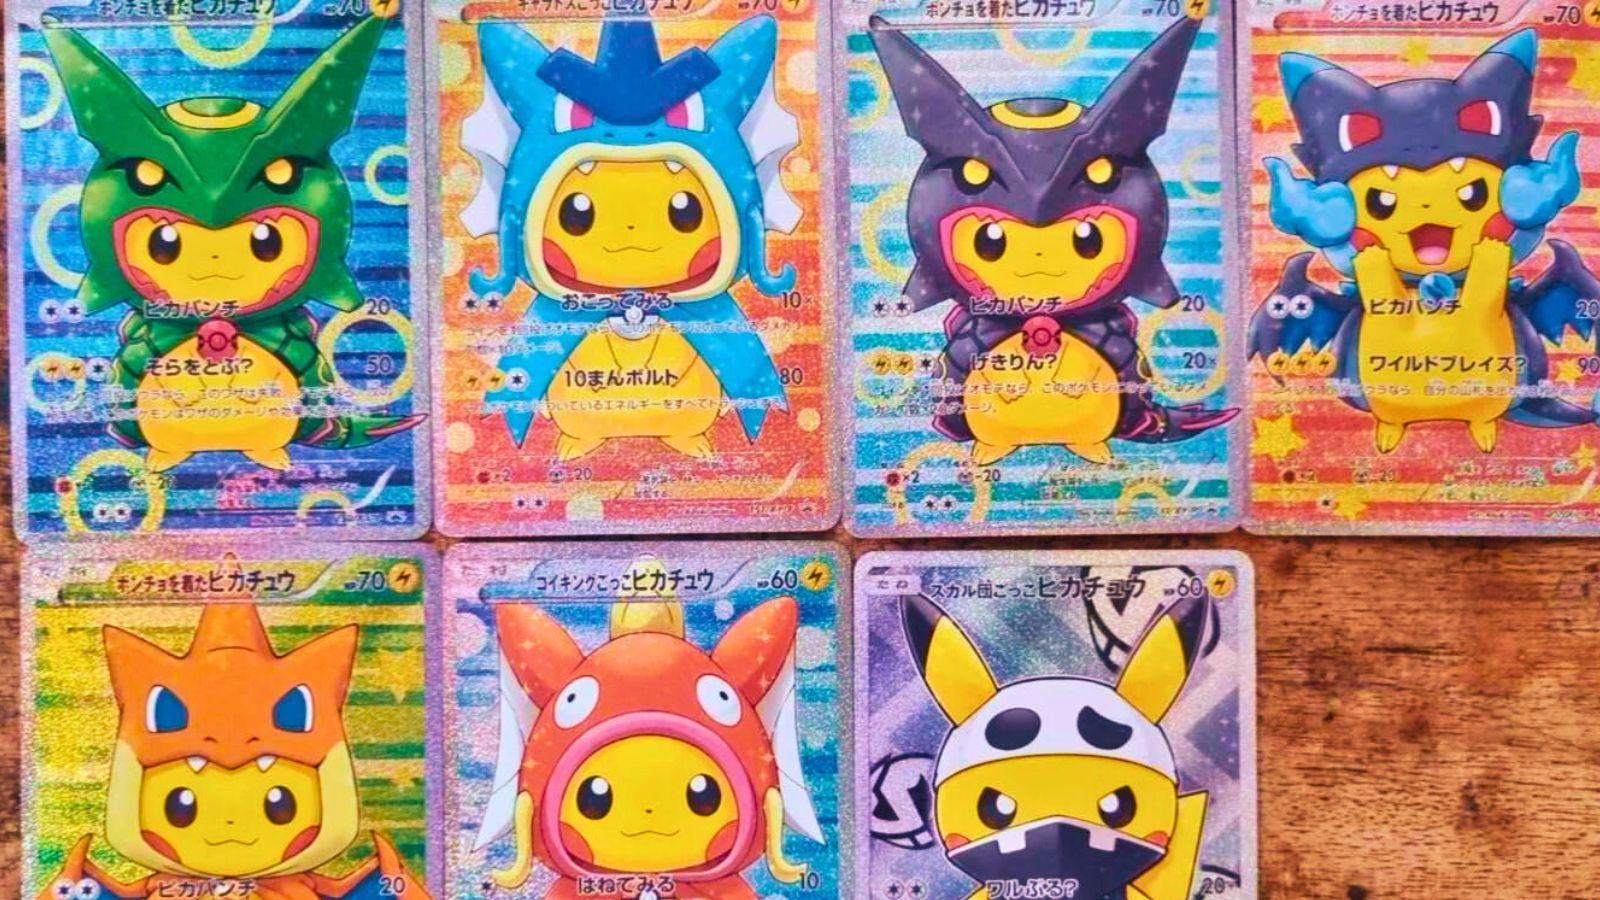 Pikachus in Ponchos in a set